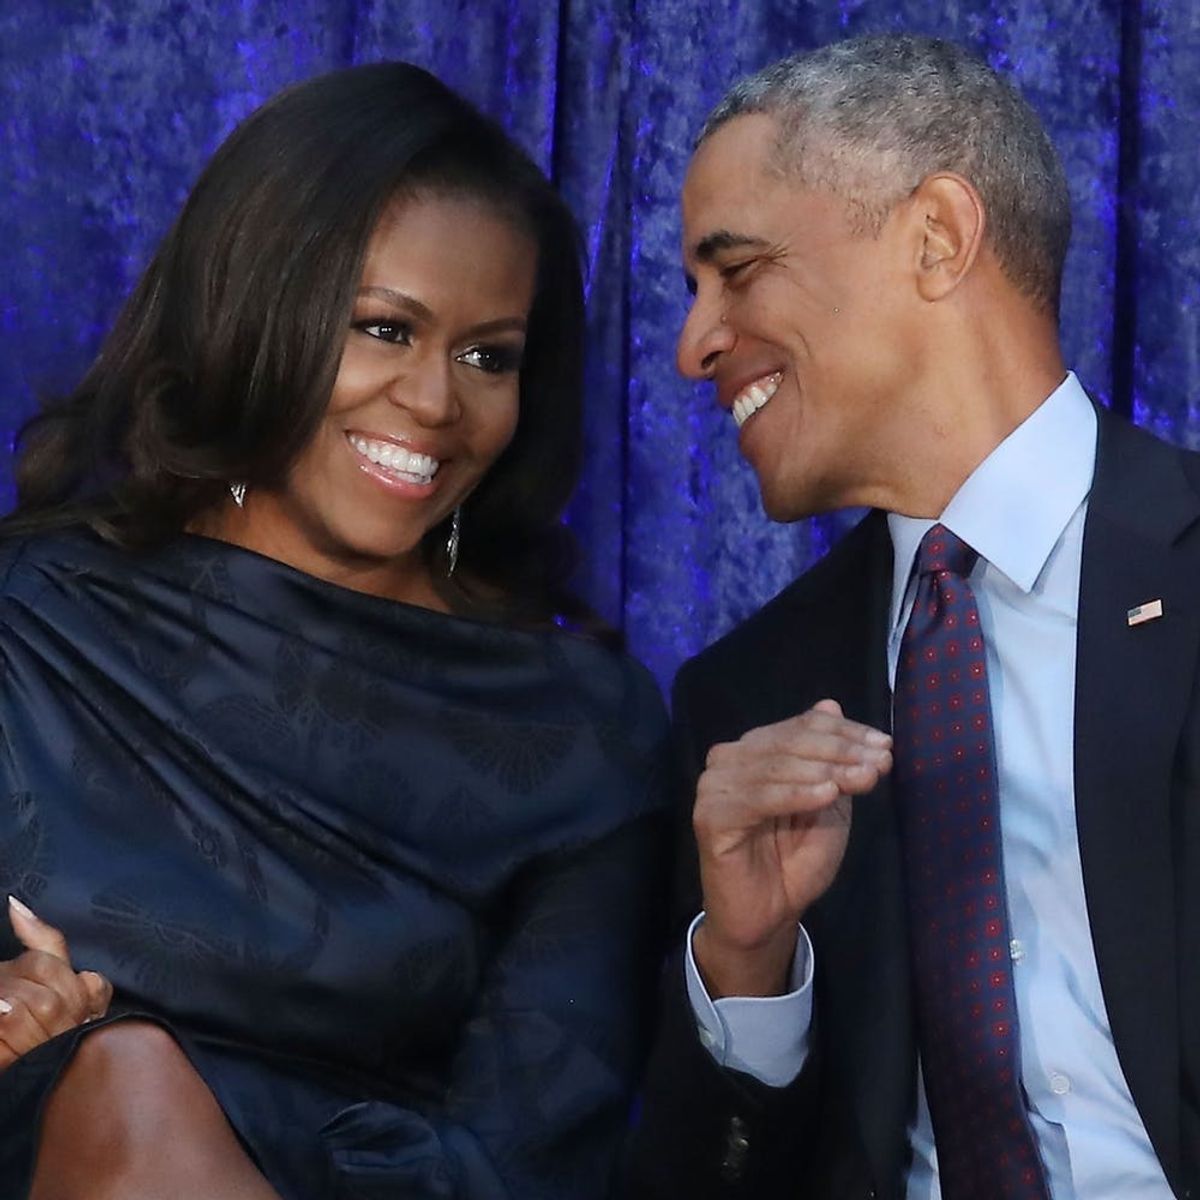 Netflix Just Signed a *Major* Multi-Year Deal With the Obamas